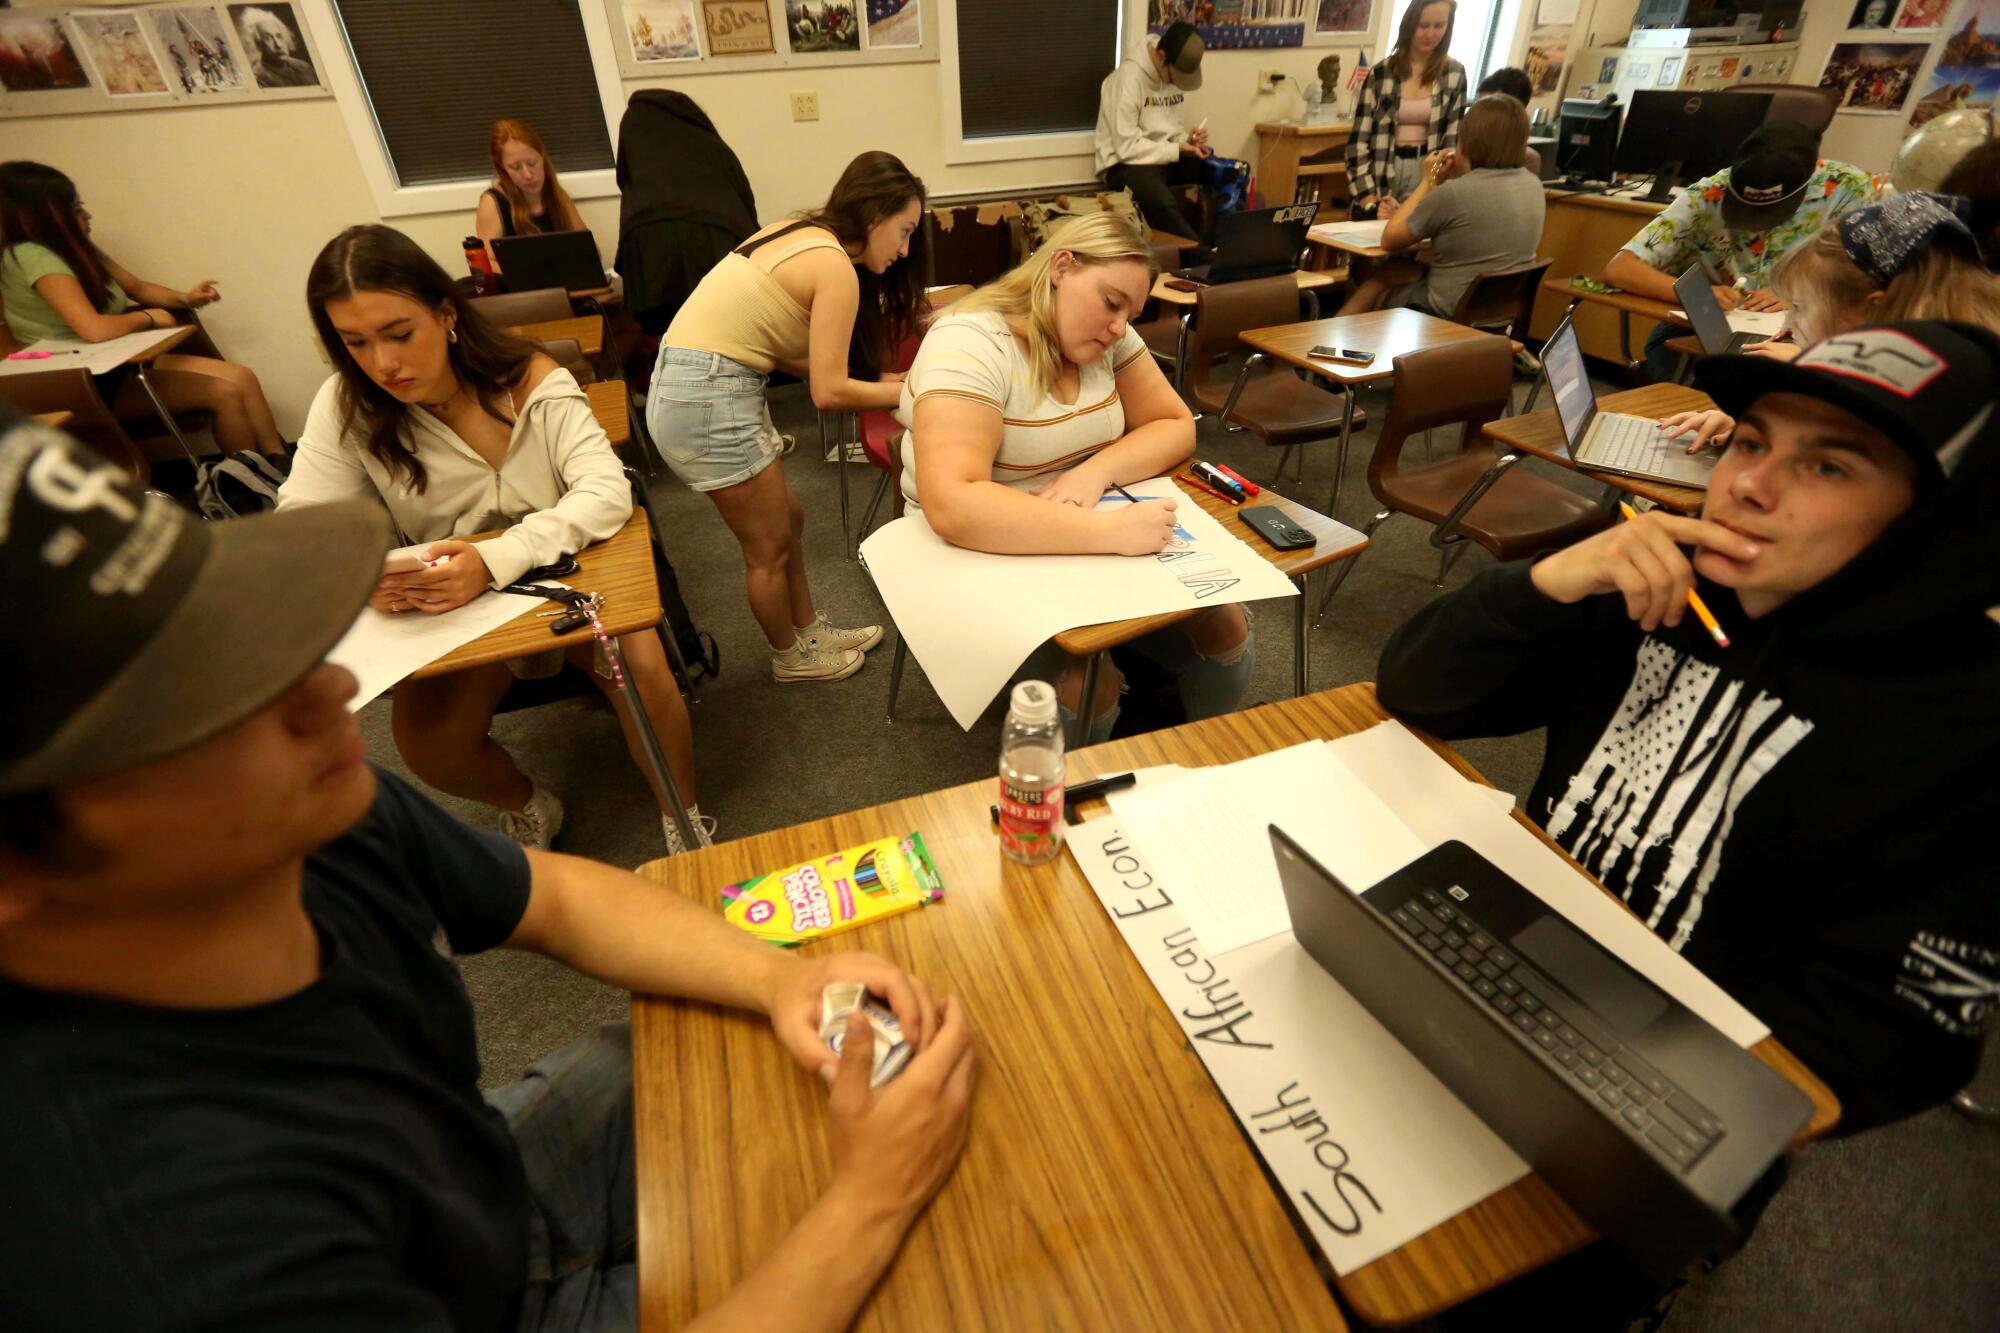 Students work on an exercise together during economics class at Modoc High School in Alturas.